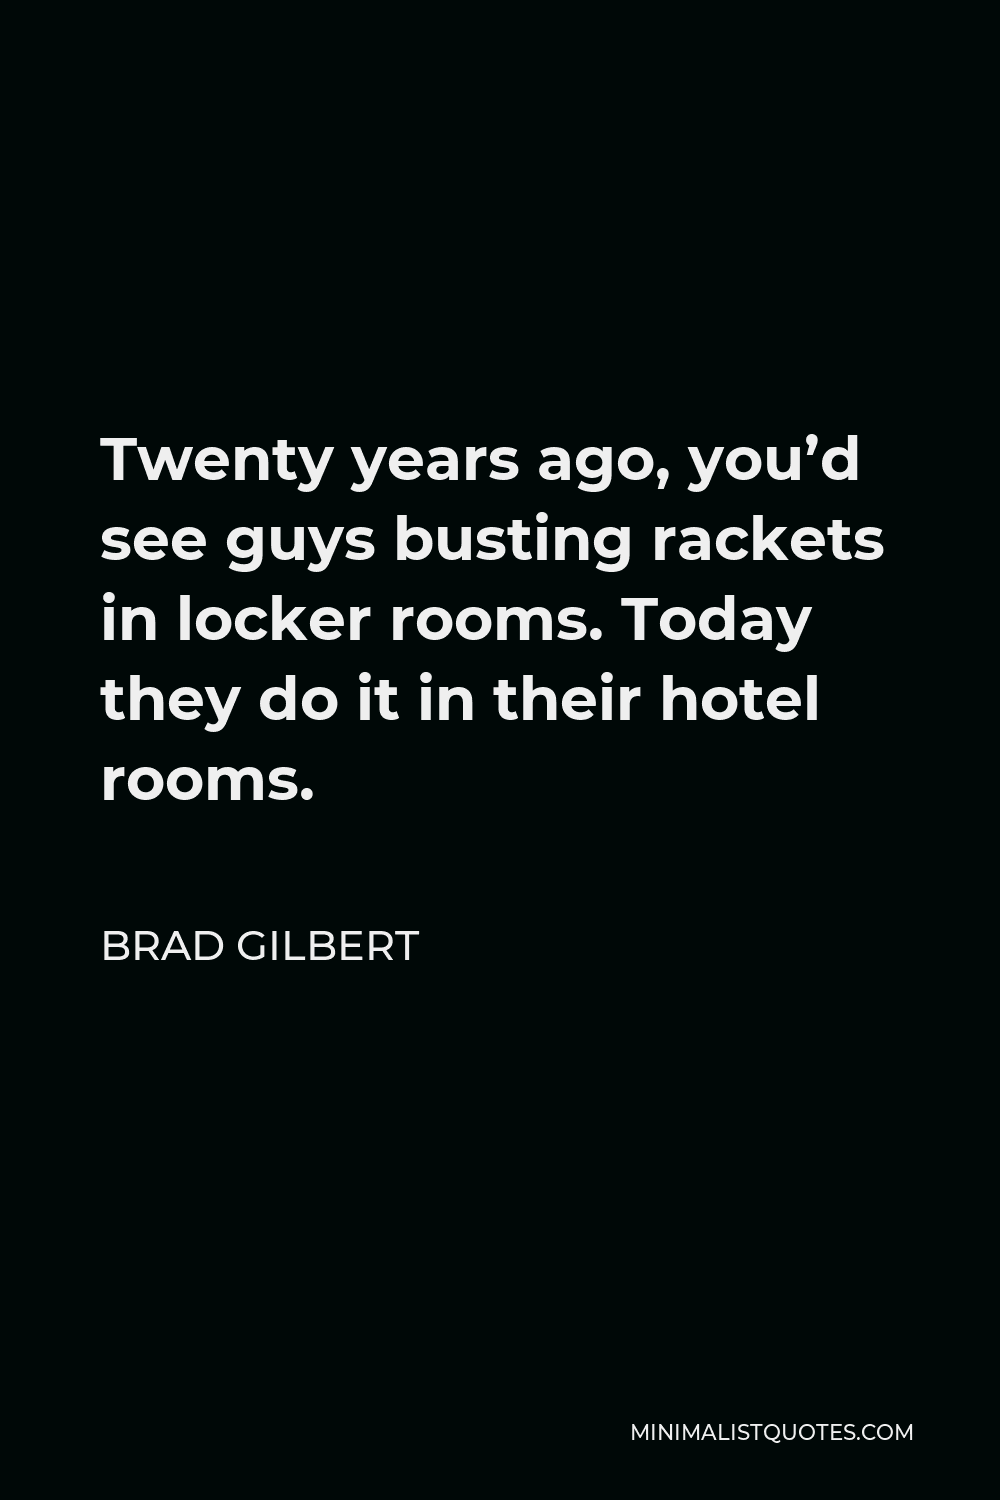 Brad Gilbert Quote - Twenty years ago, you’d see guys busting rackets in locker rooms. Today they do it in their hotel rooms.